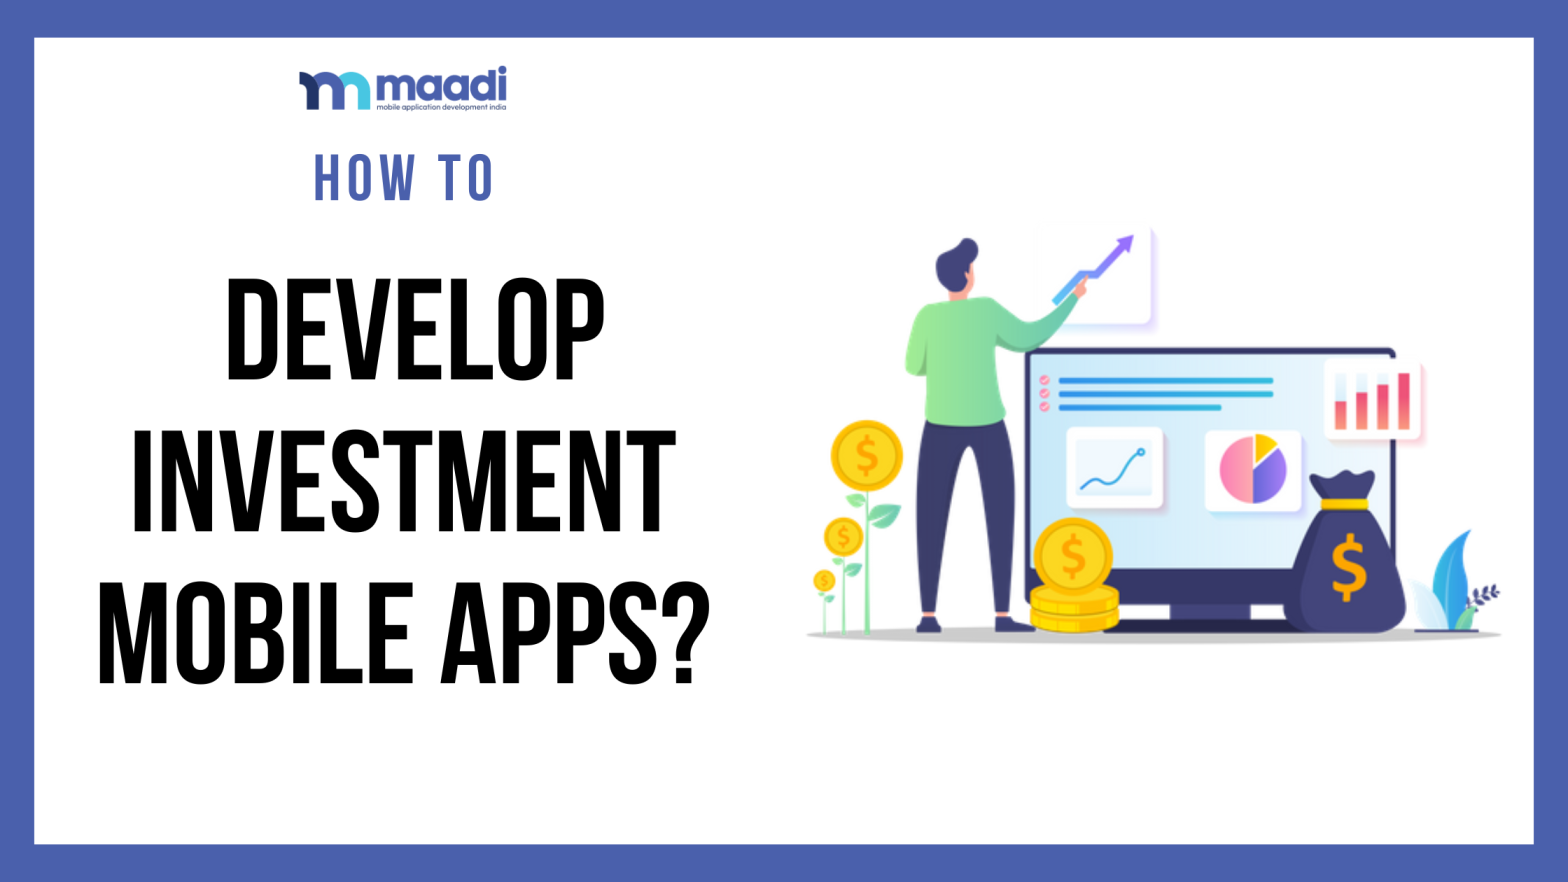 How to Develop Investment Mobile Apps?